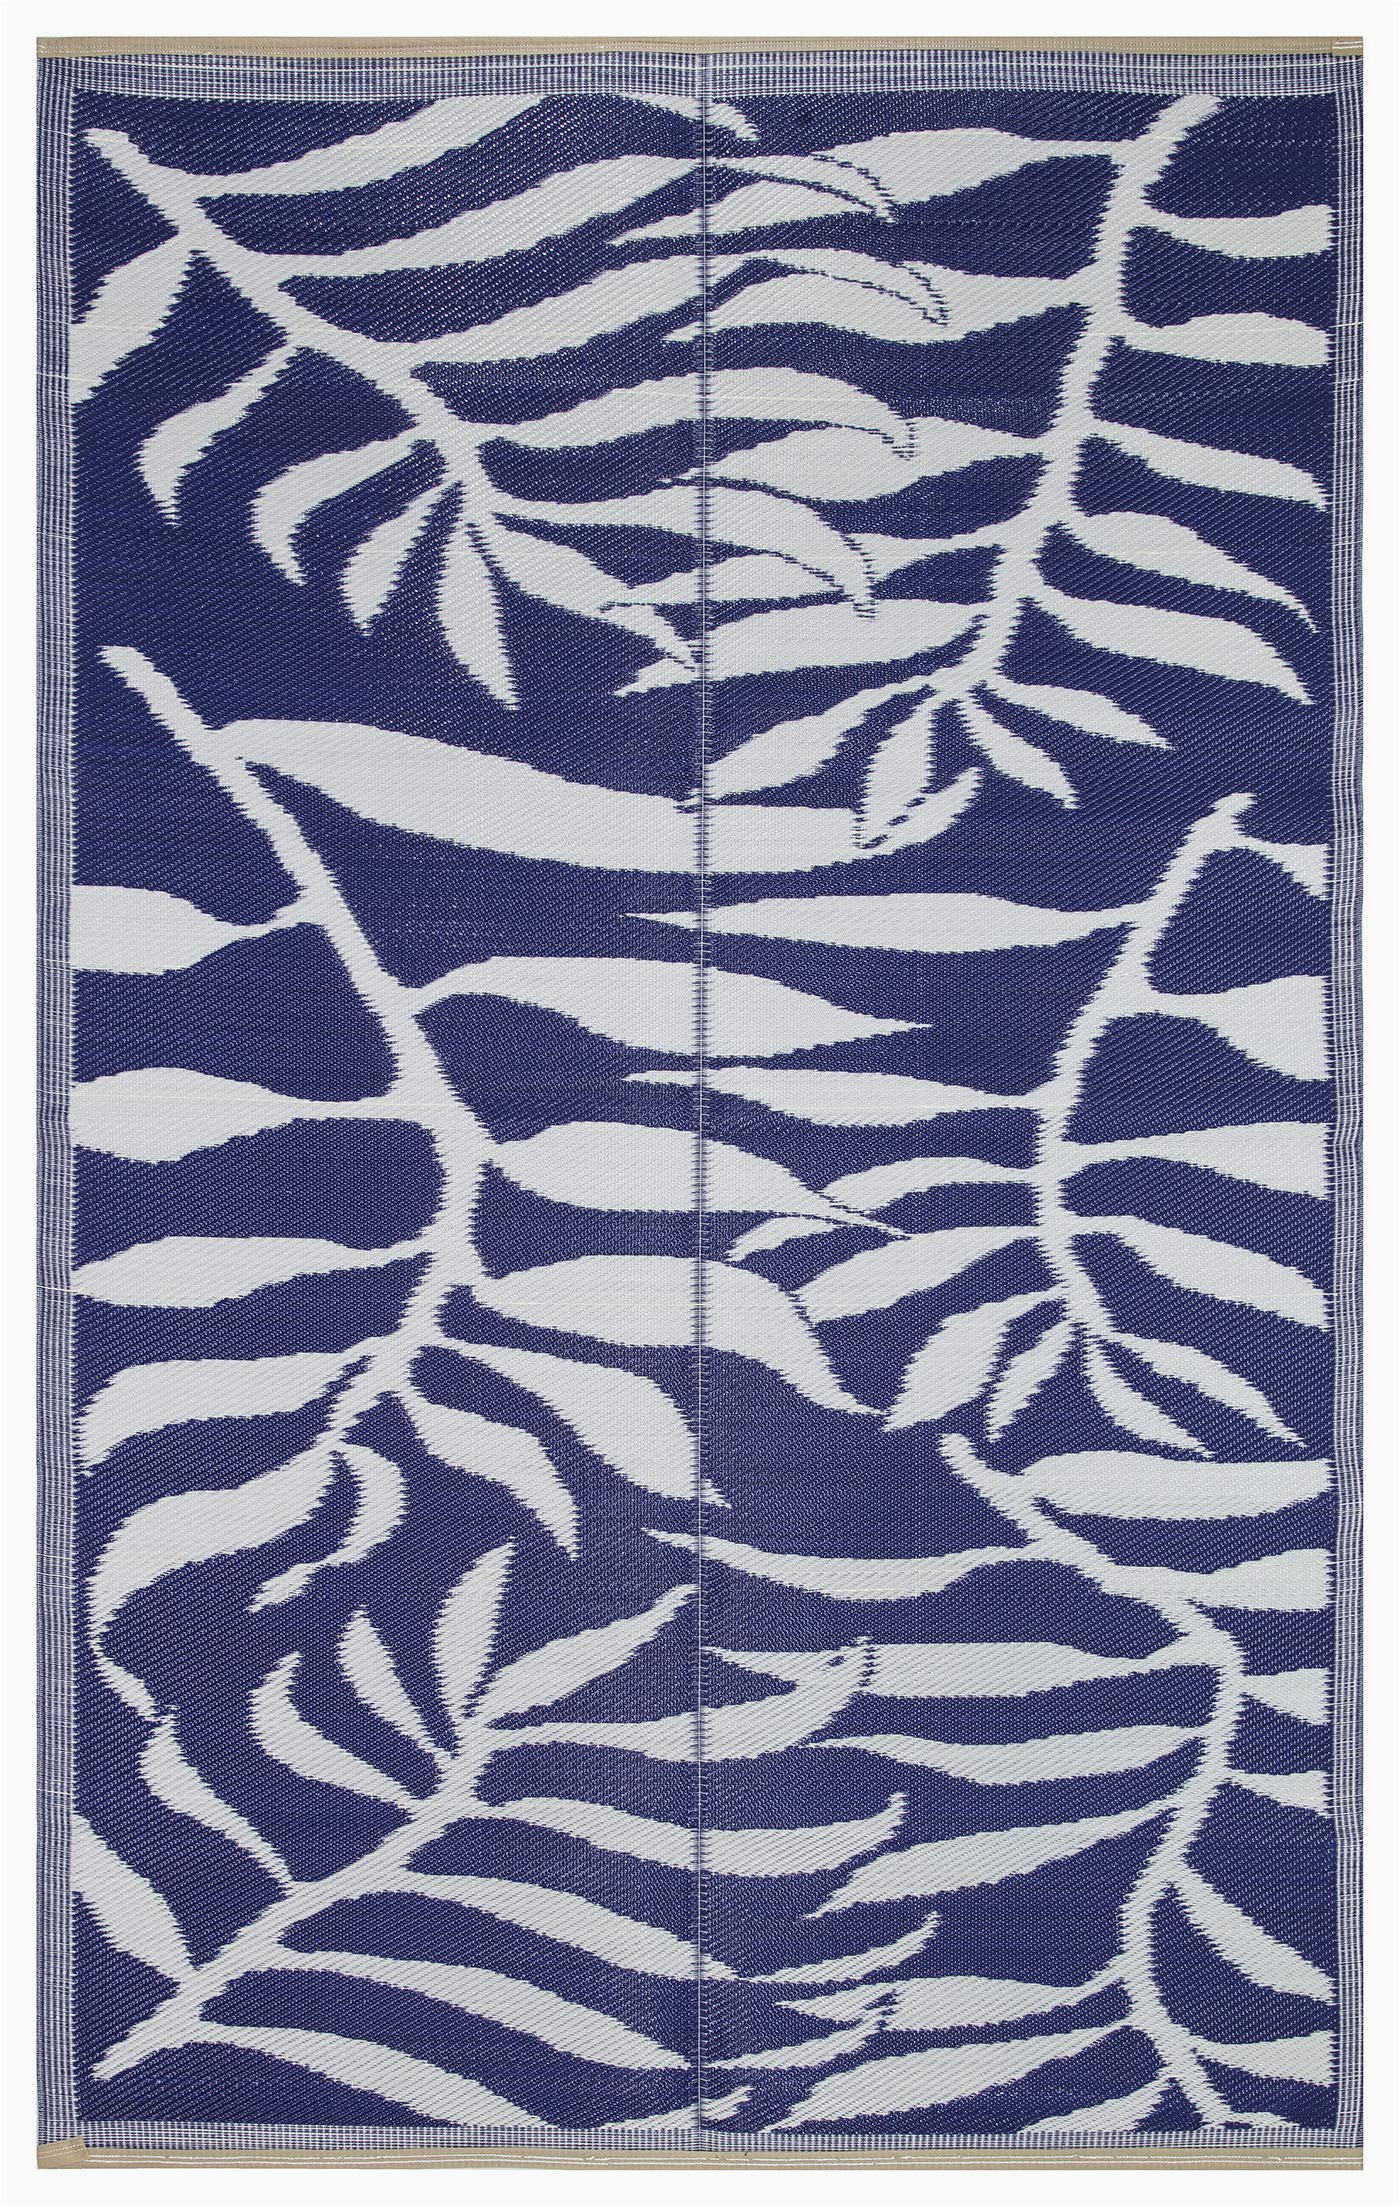 Blue and White Indoor Outdoor Rug Lightweight Indoor Outdoor Reversible Plastic area Rug 5 9 X 8 9 Feet Leaf Pattern Blue White